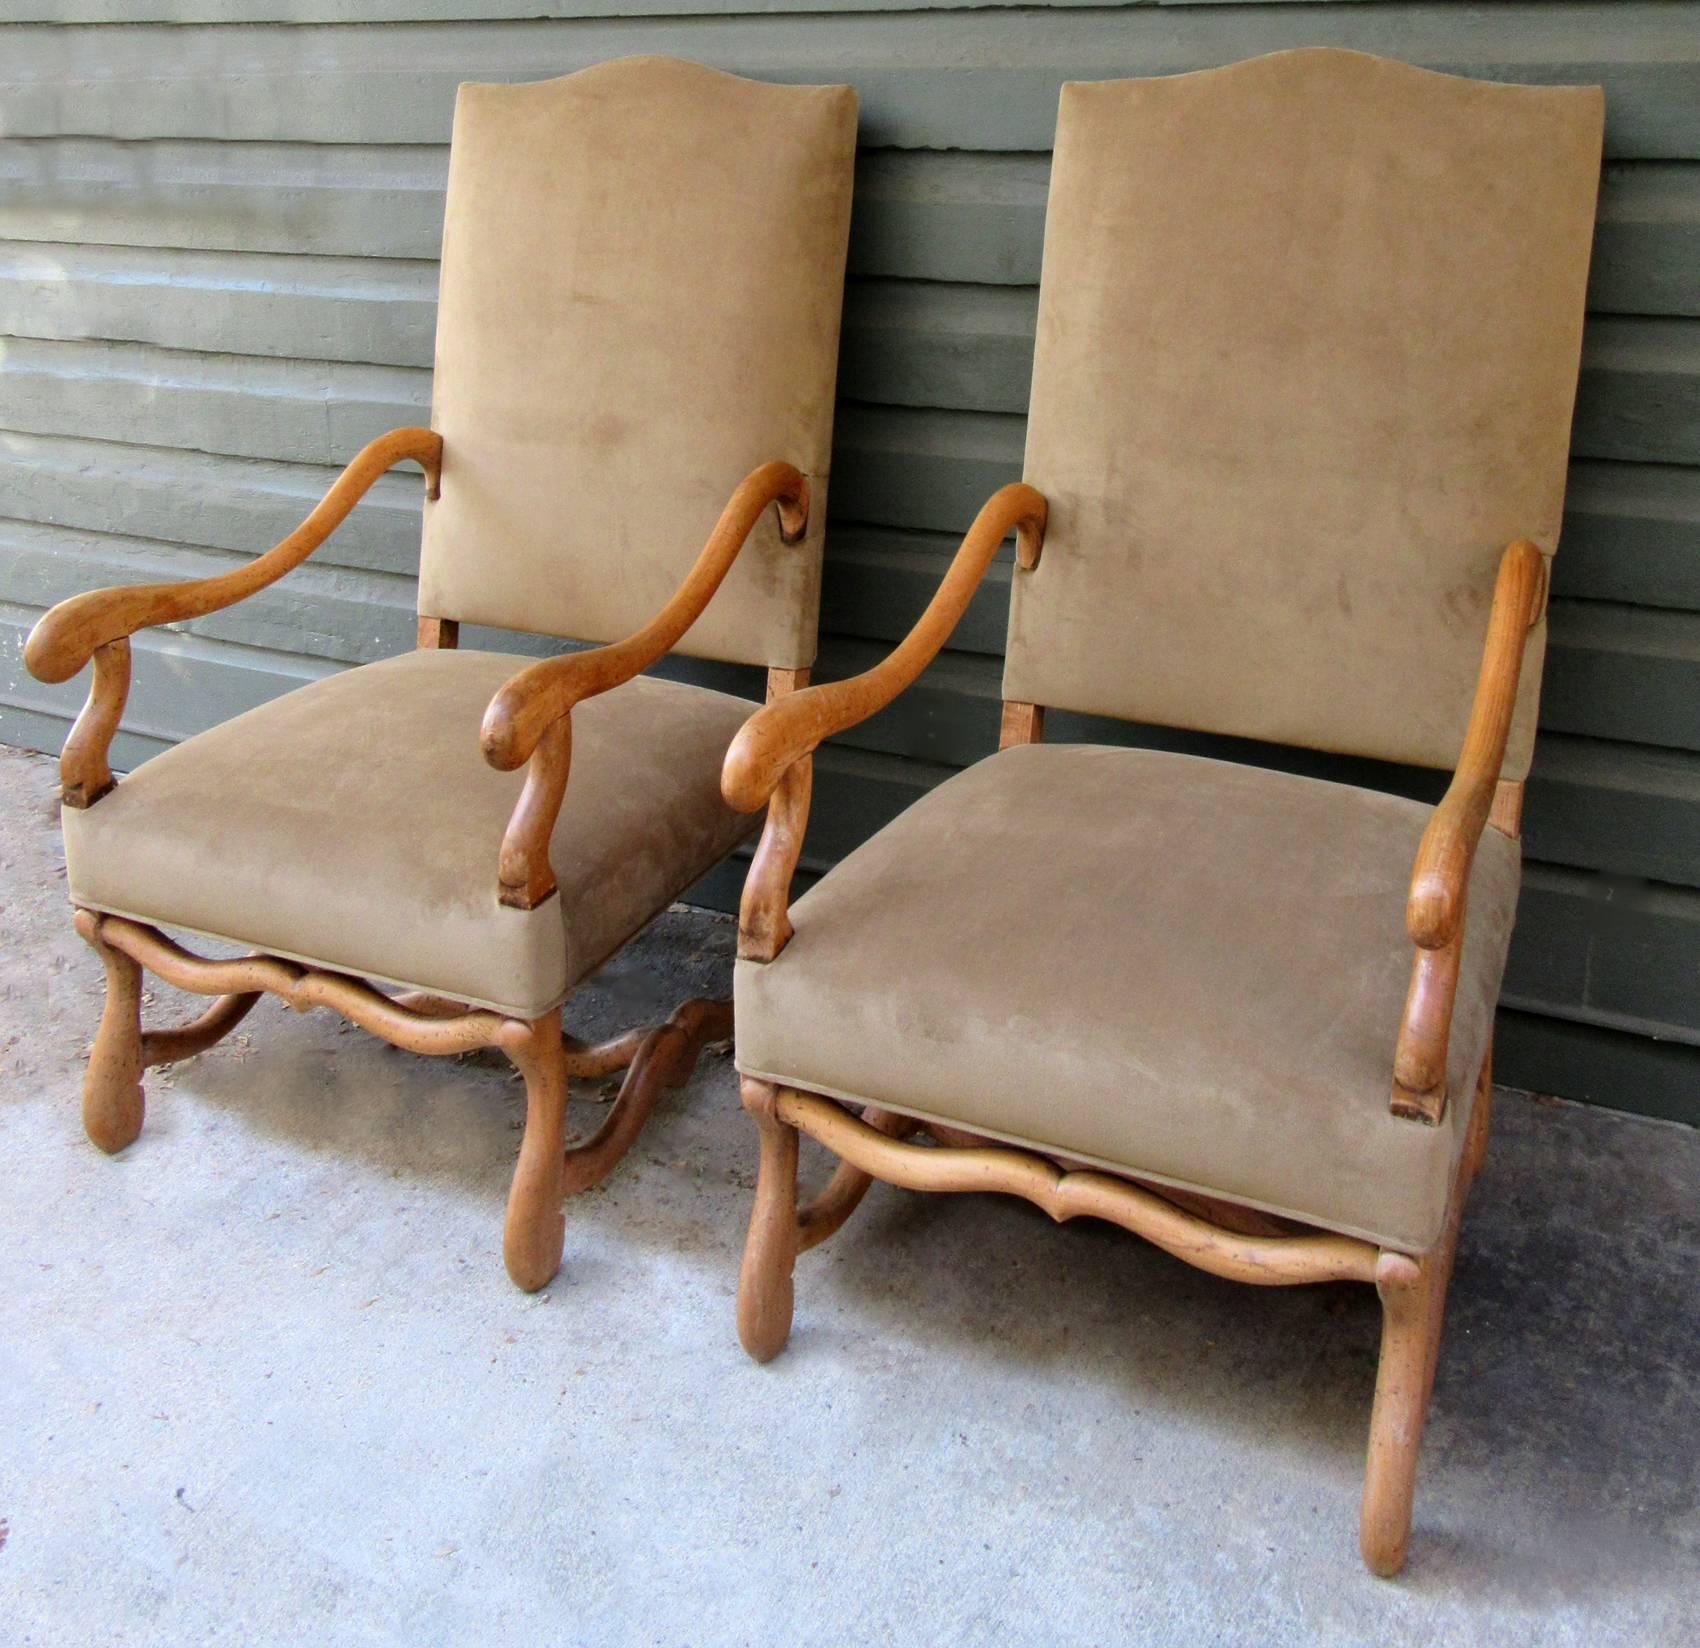 A pair of larger scale French armchairs in Louis XII style, circa 1820, featuring solid fruitwood frames that have been recently reupholstered in a rich camel colored sueded silk.